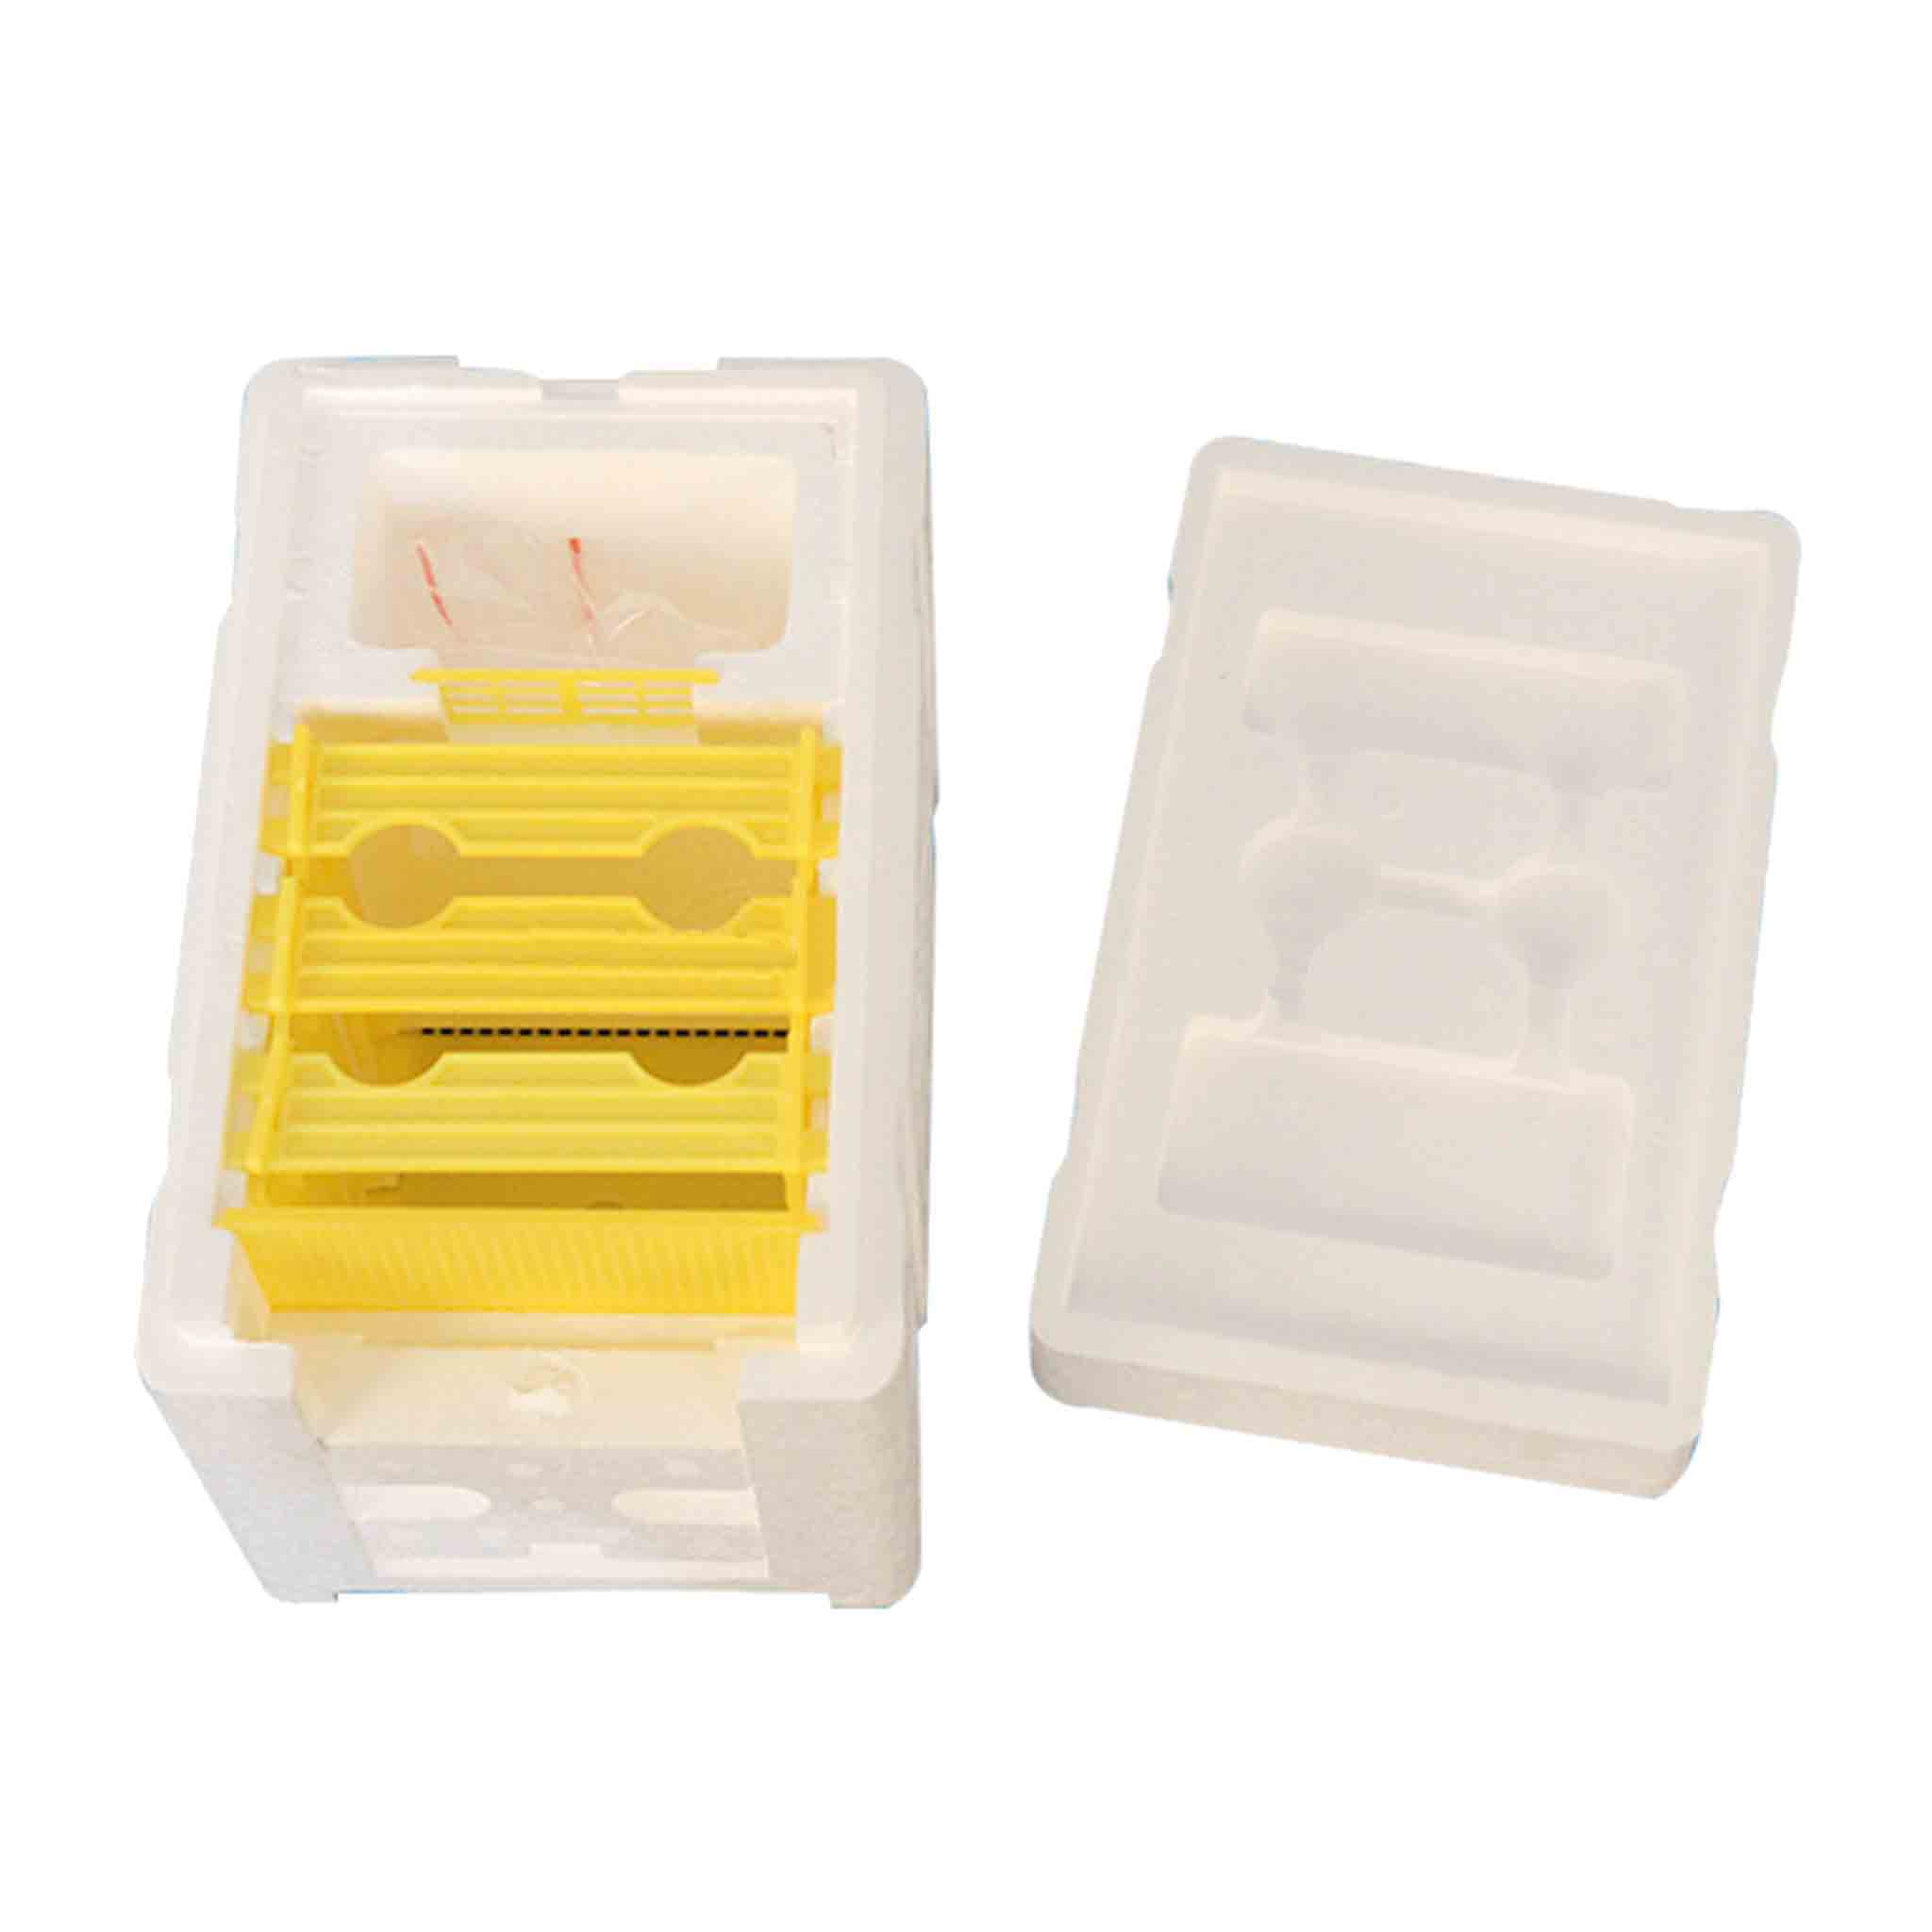 Mini Mating NUC Box (2 Pack) - Hives collection by Buzzbee Beekeeping Supplies